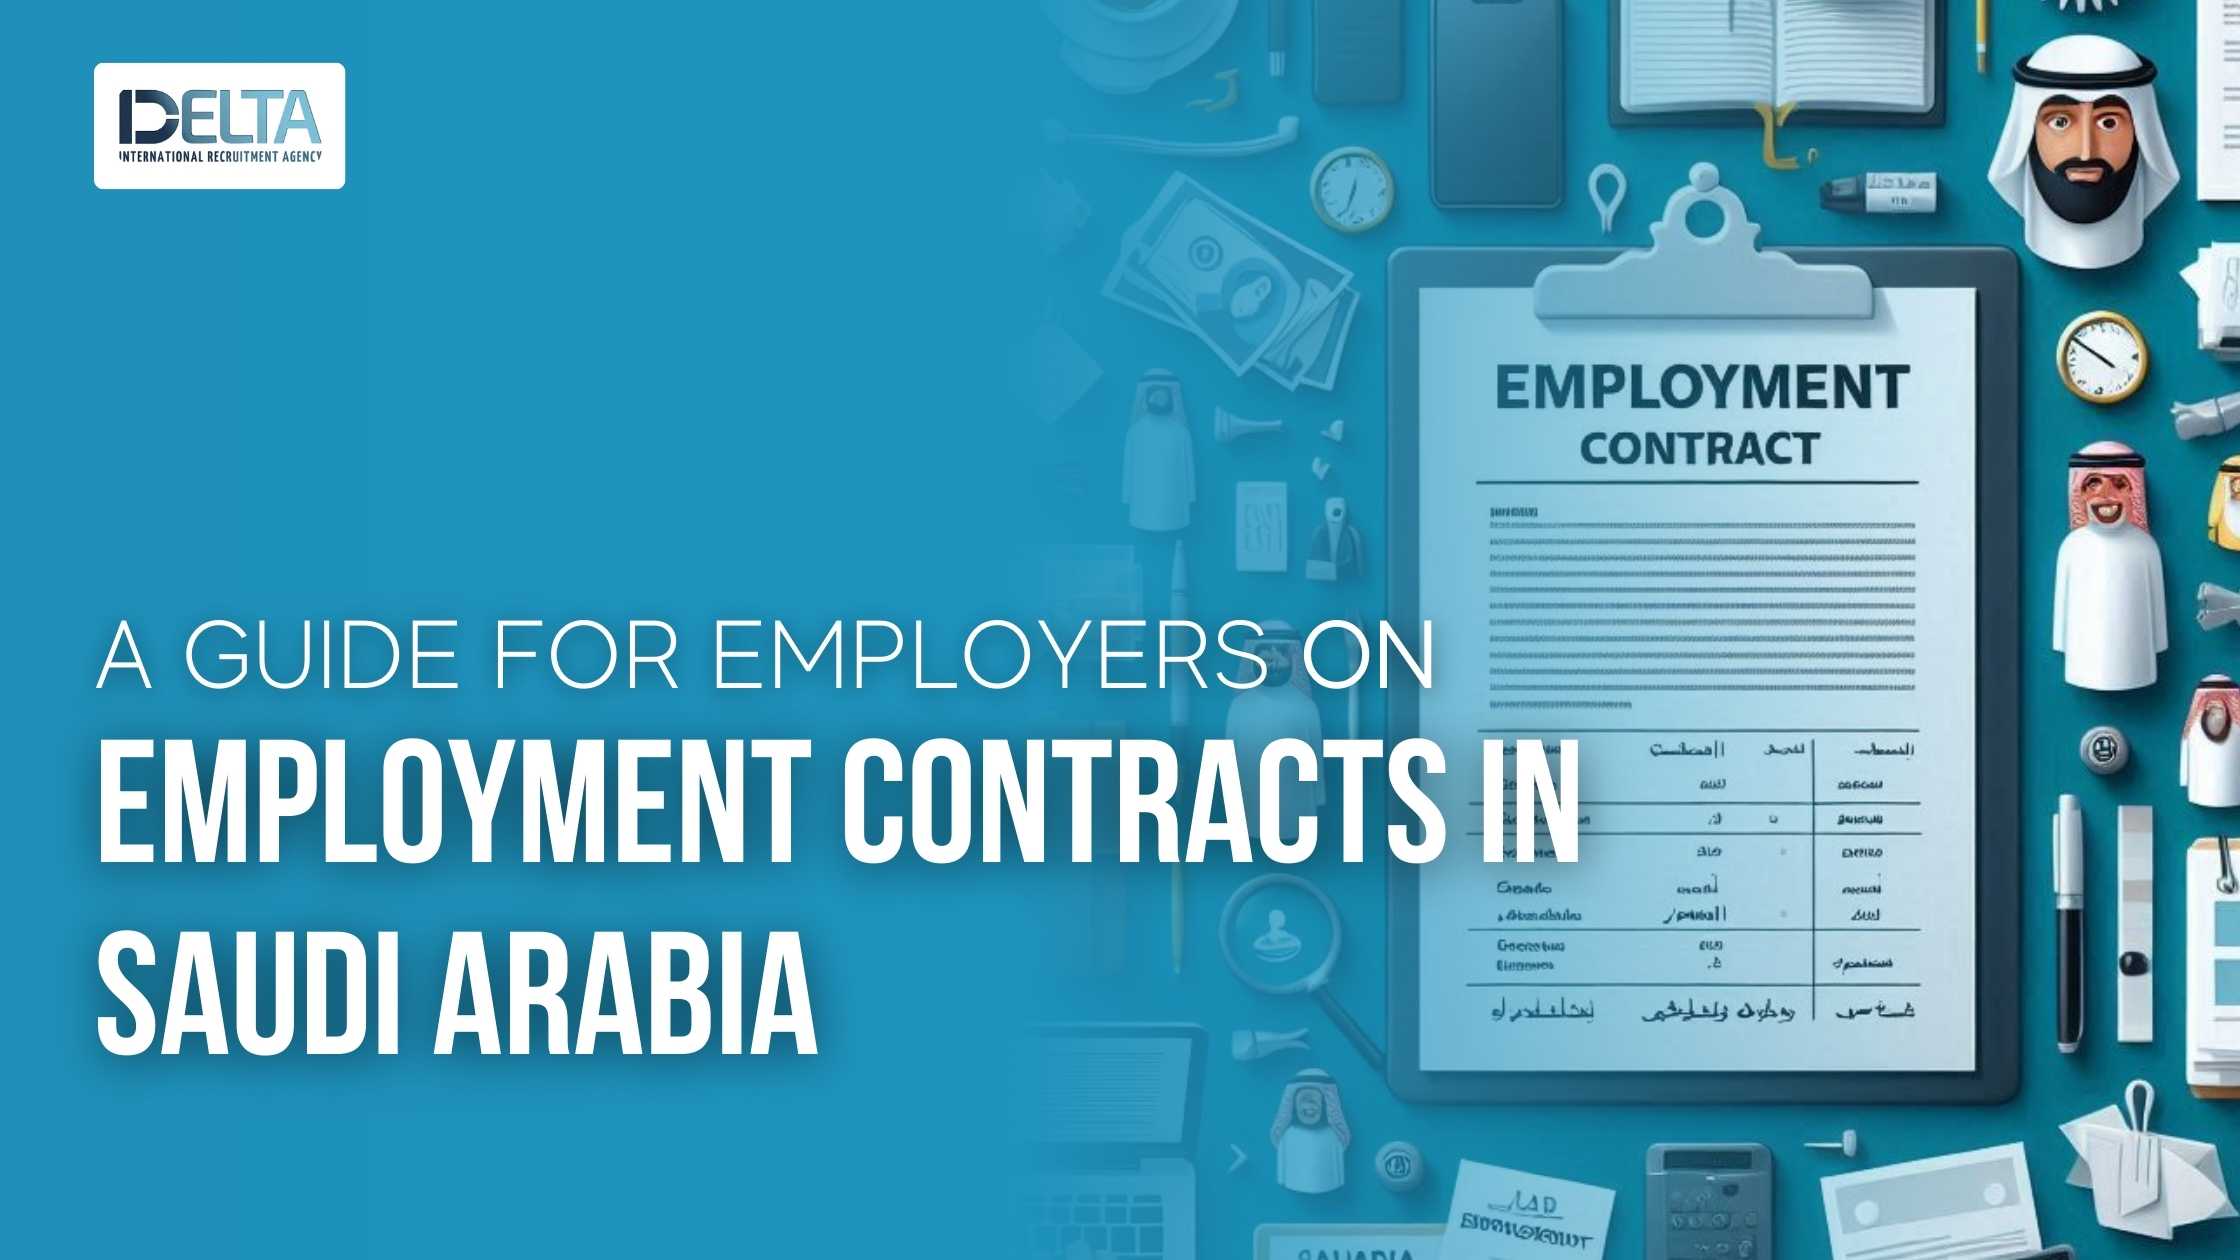 Employment Contracts in Saudi Arabia: A Guide for Employers